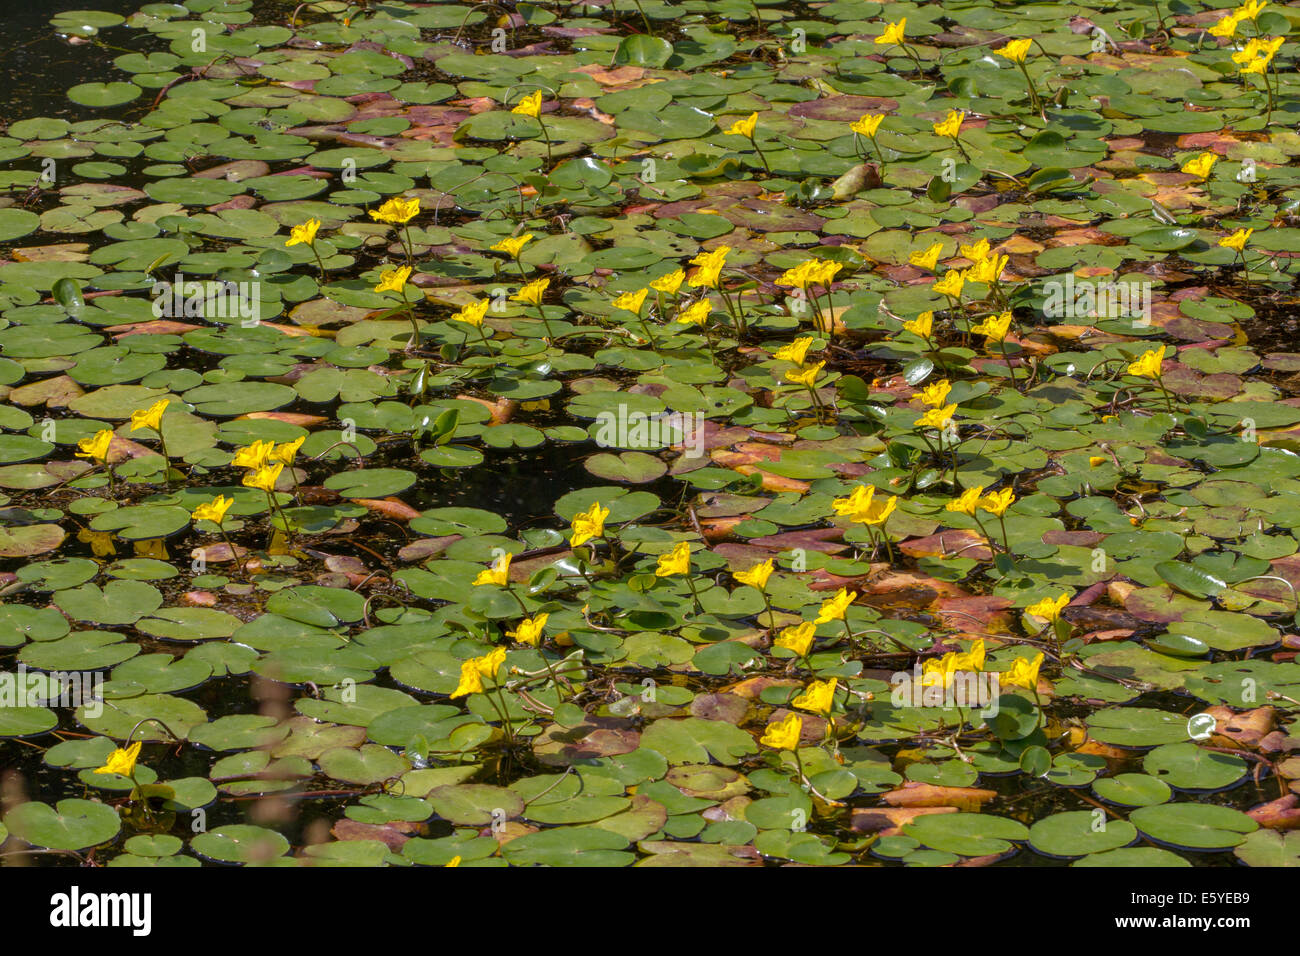 Fringed Water-lily (Nymphoides peltata) covering the surface of a canal Stock Photo